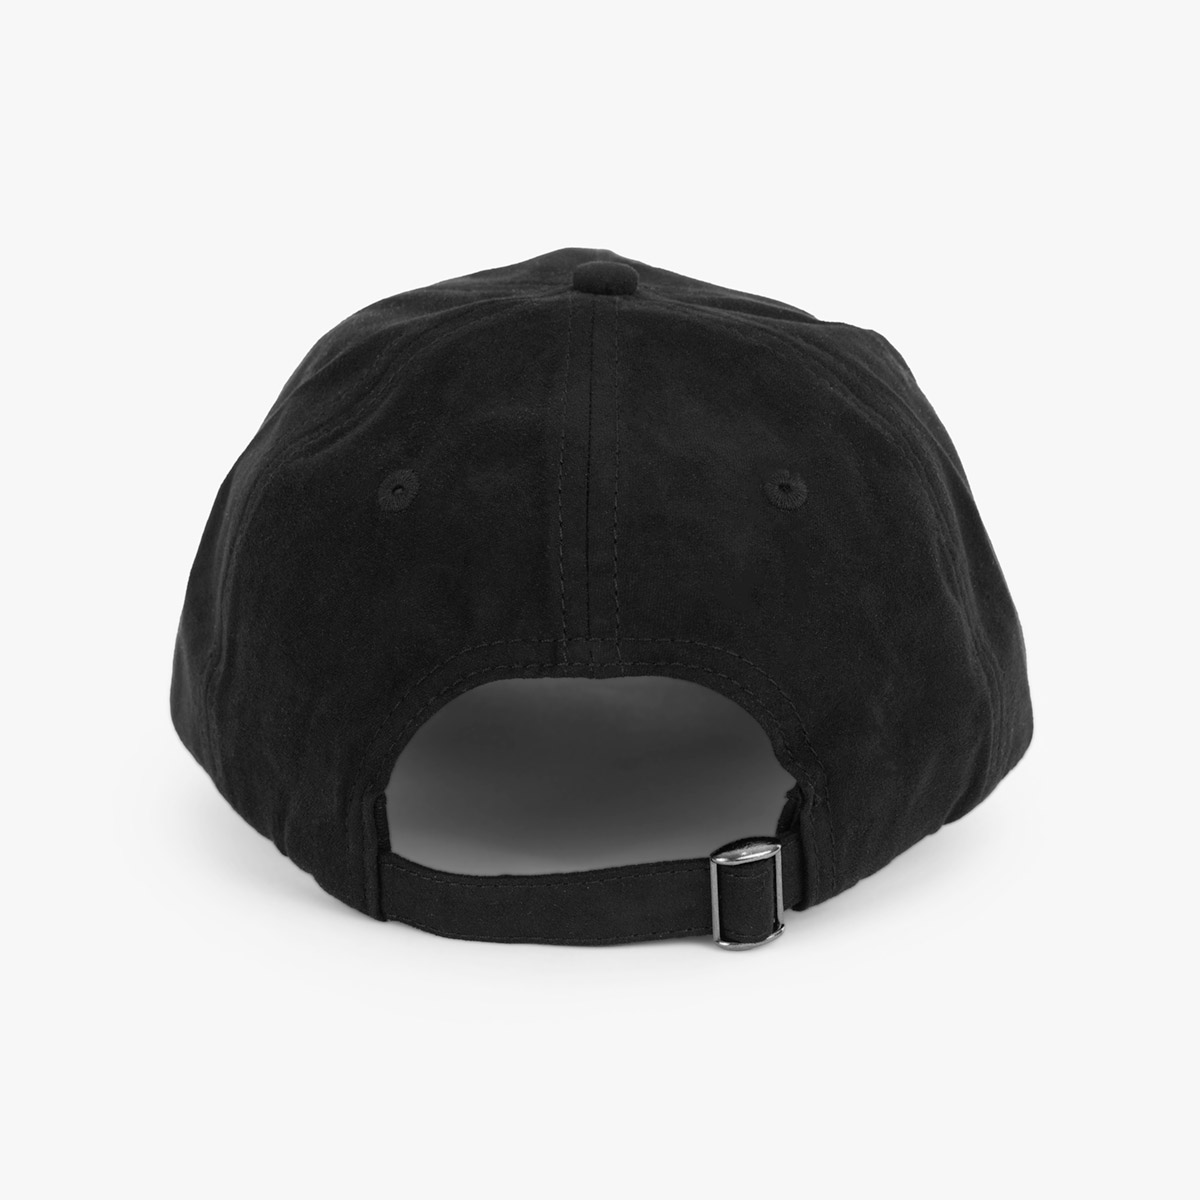 Guitar Company Vegan Leather Suede Hat in Black image number 3